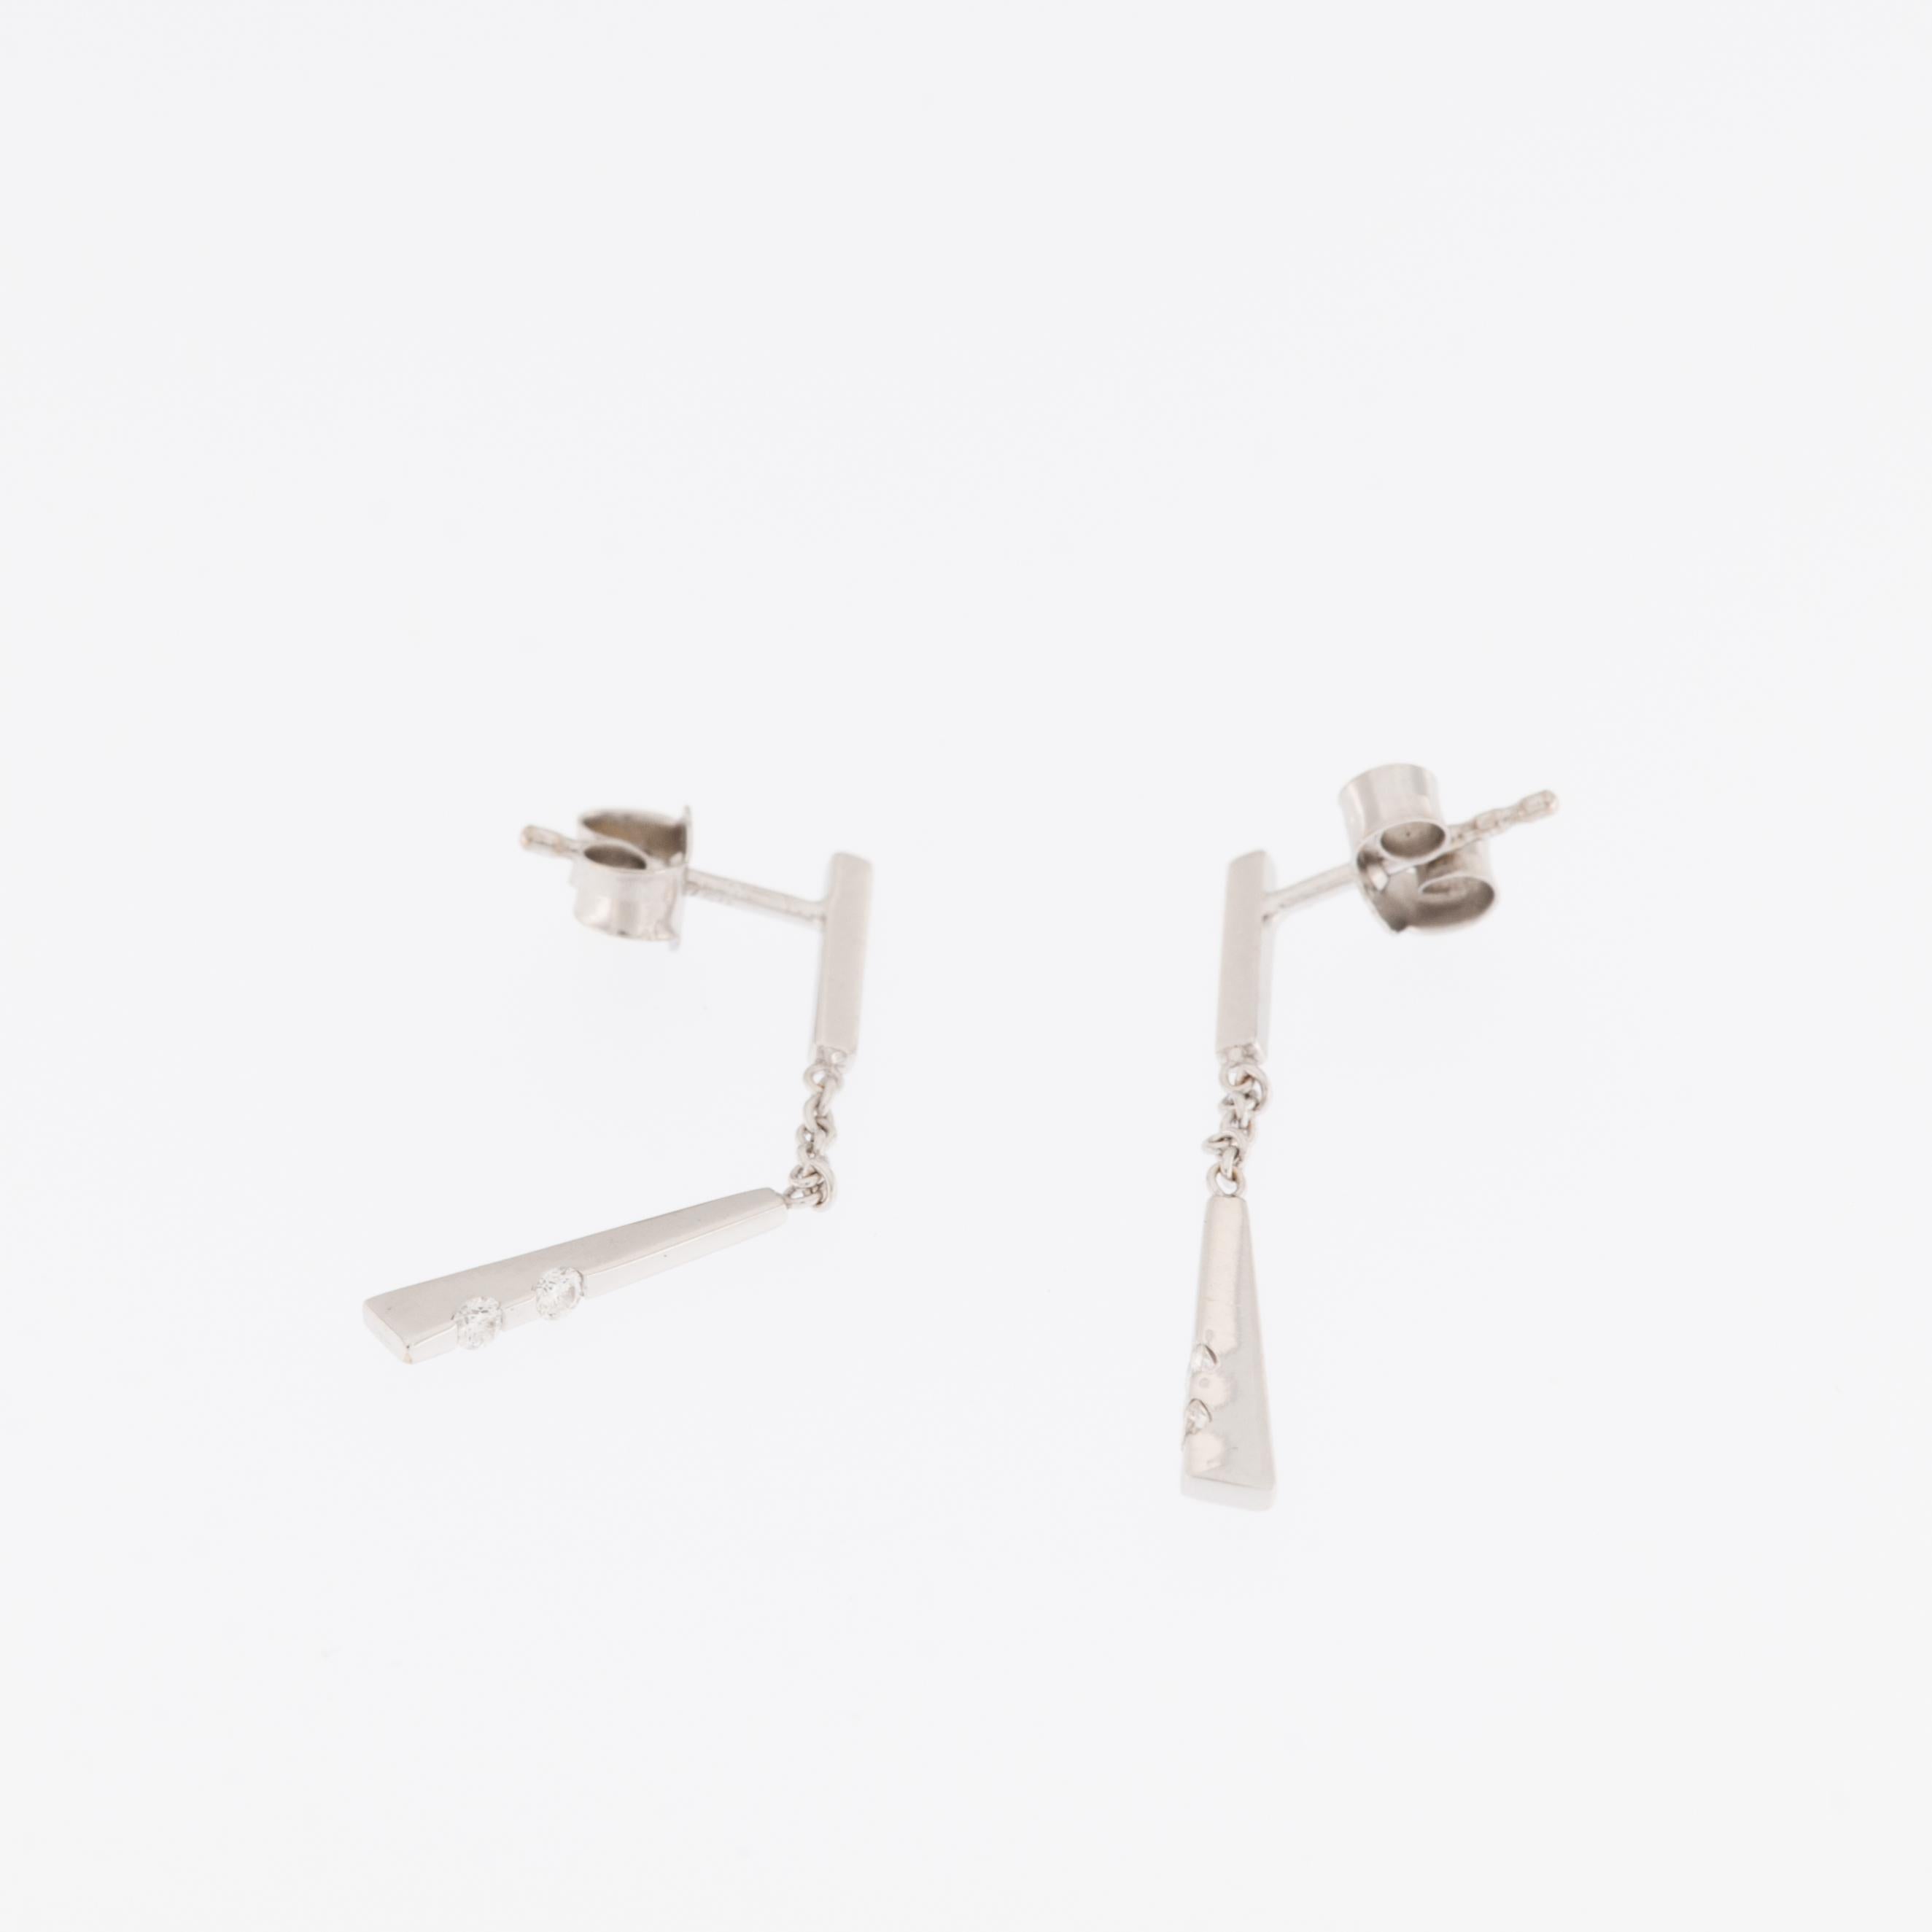 These drop earrings are an elegant piece of jewelry crafted from 18kt white gold and adorned with exquisite diamonds. They are designed to hang elegantly from the earlobes, creating a graceful and eye-catching look. 

These drop earrings are made